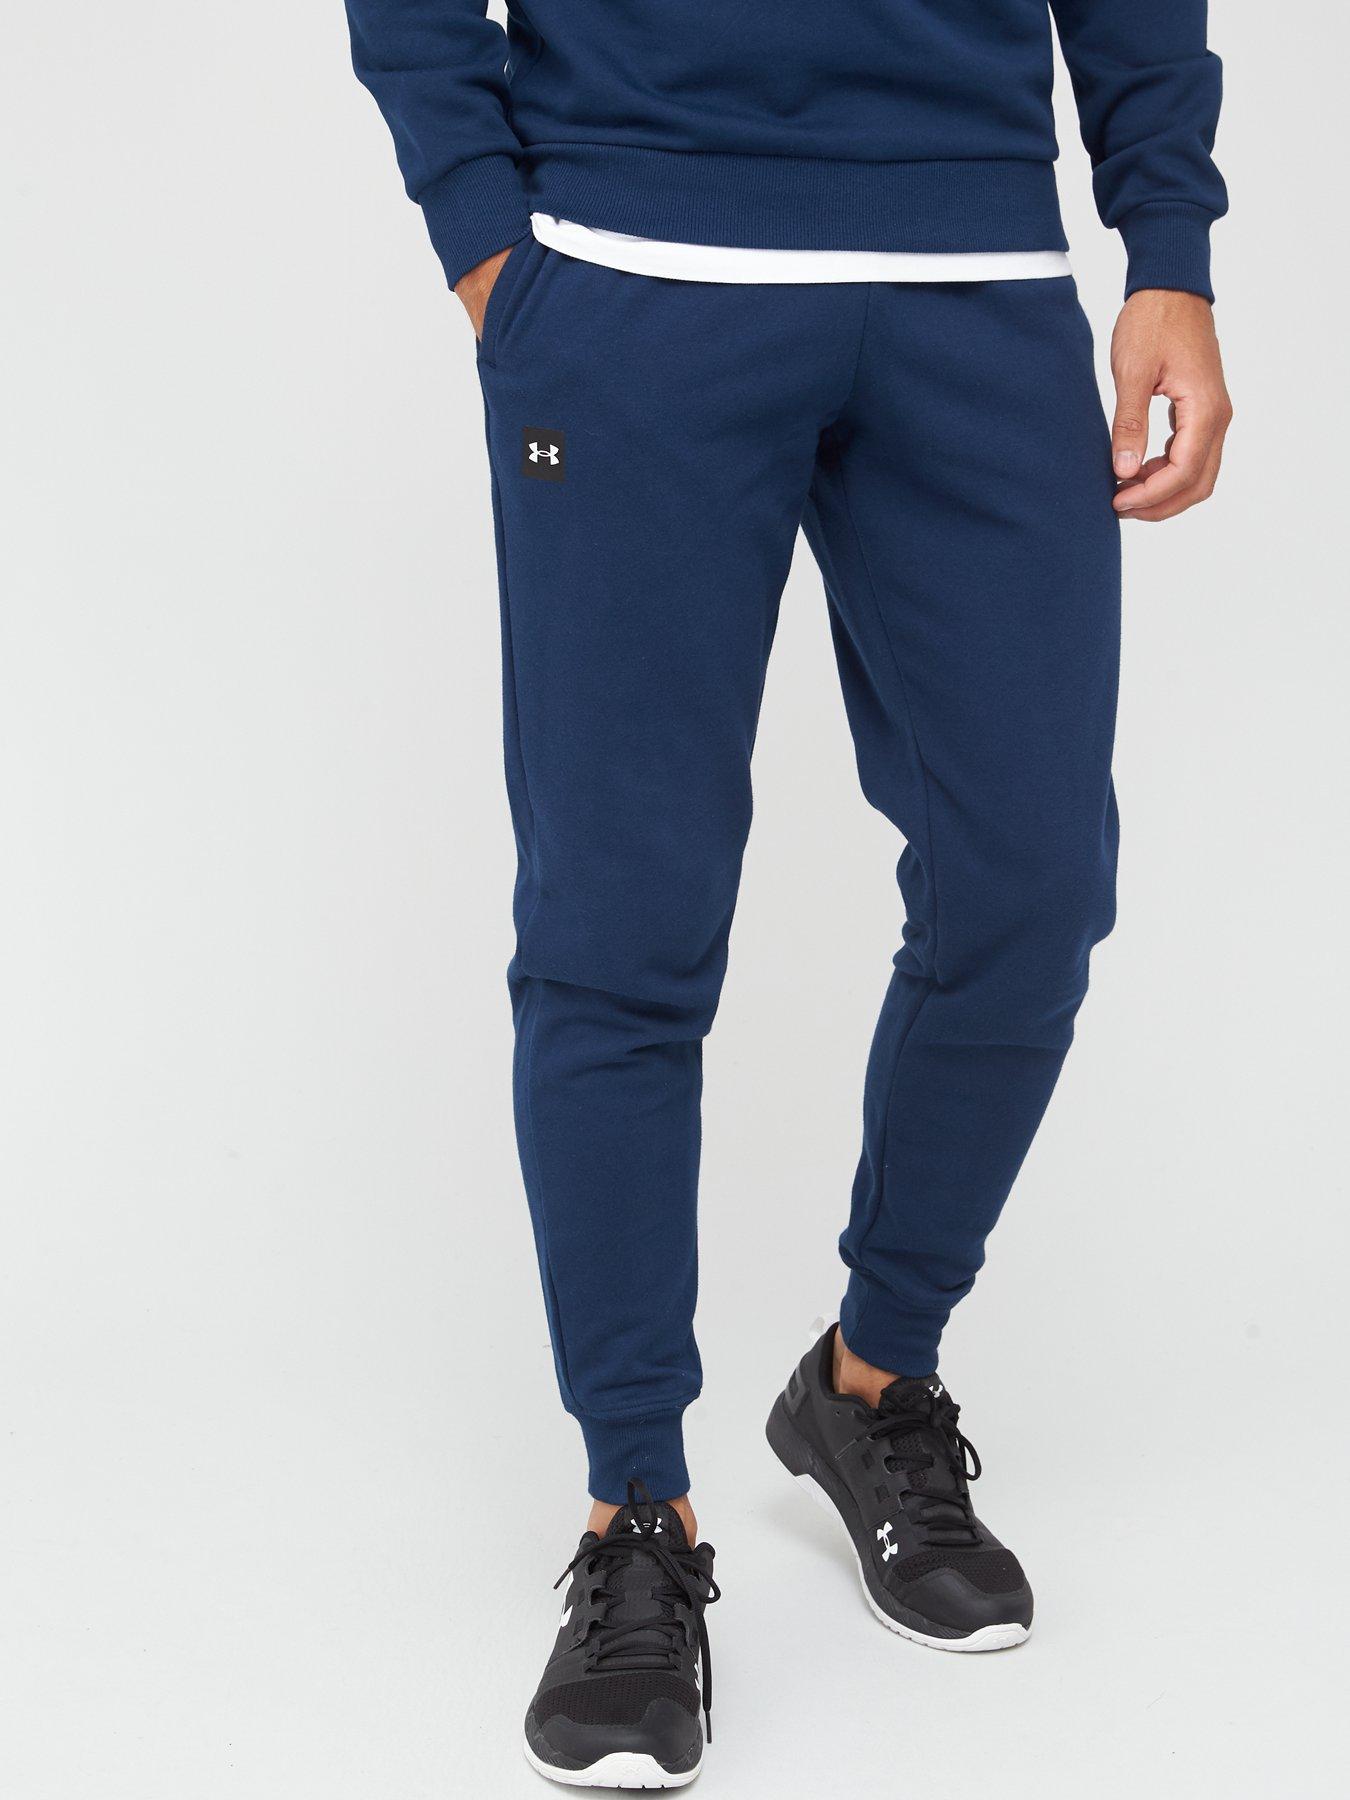 Antagonista Araña Pino Tracksuit Bottoms | Tracksuits | Men | www.very.co.uk